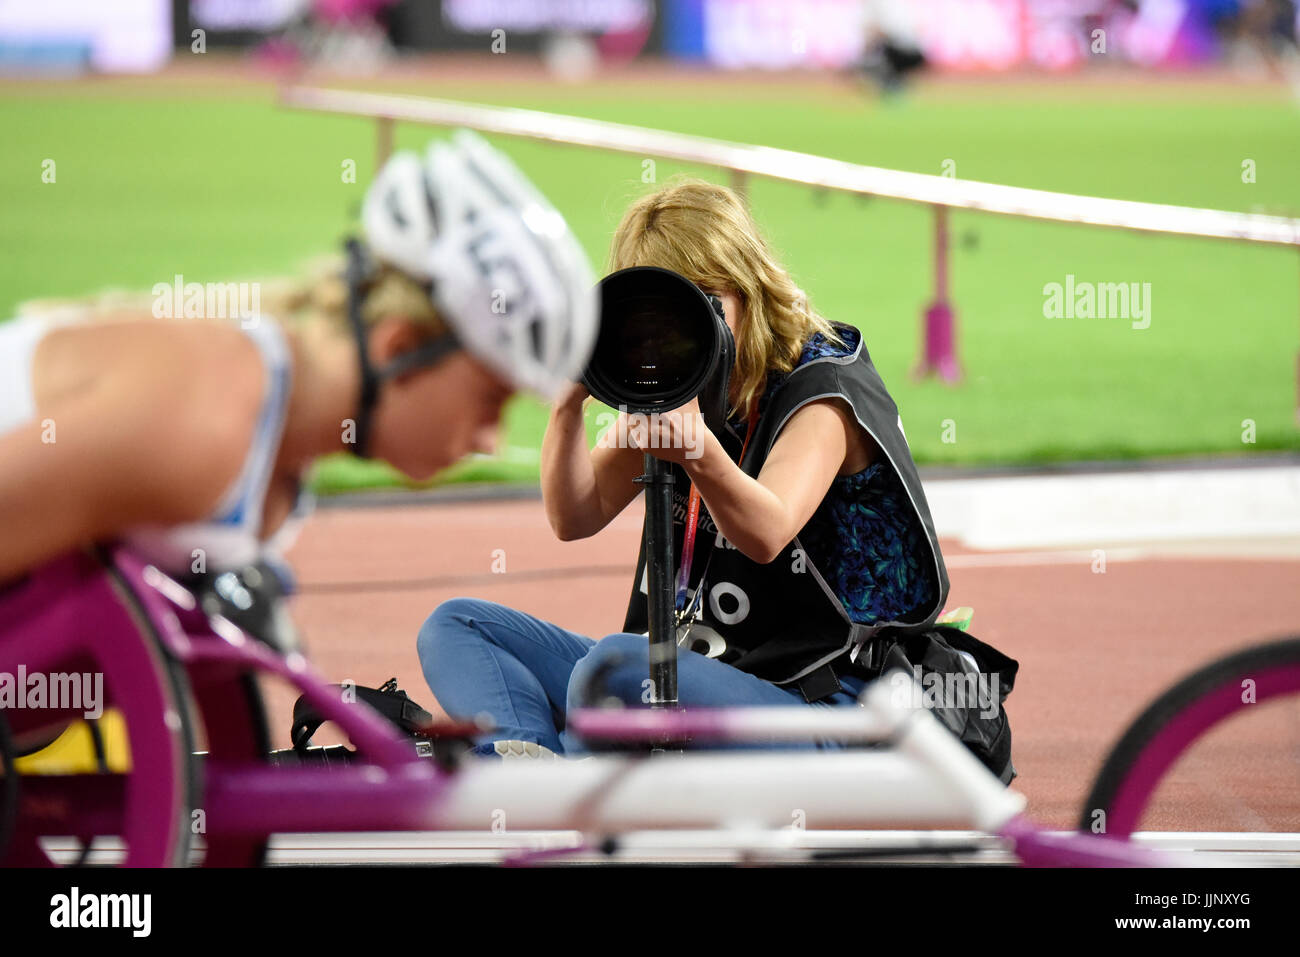 Samantha Kinghorn competing at the World Para Athletics Championships in the London Olympic Stadium, London, 2017. T53 final Stock Photo